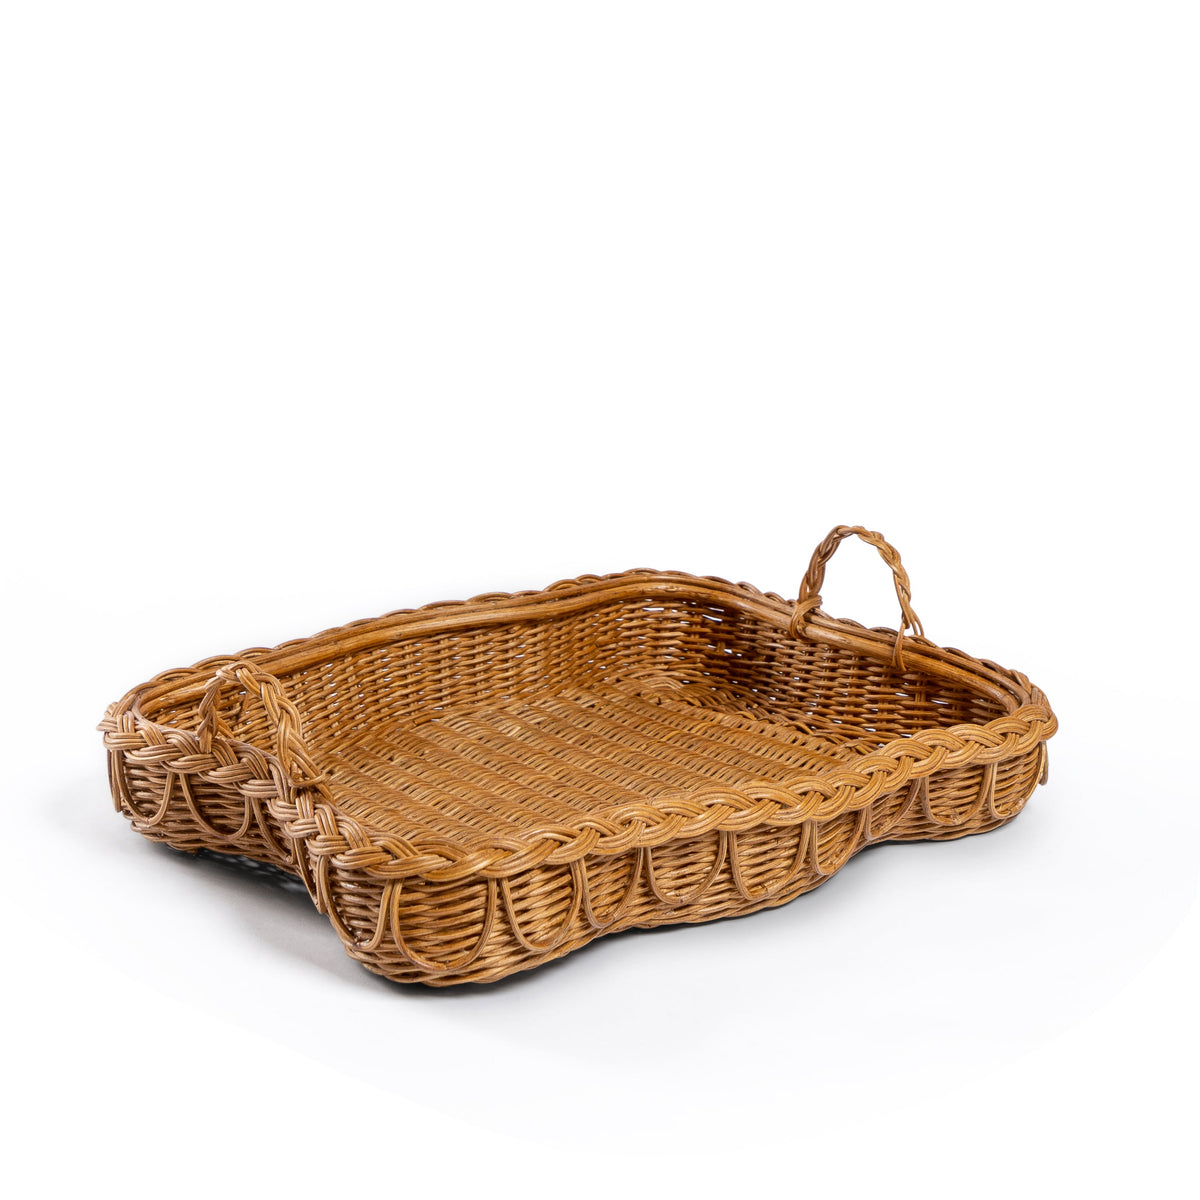 Photo of Sharland-England's Hadley tray Hand-crafted from 100% natural rattan, featuring fixed handles and a beautifully braided, scalloped edge